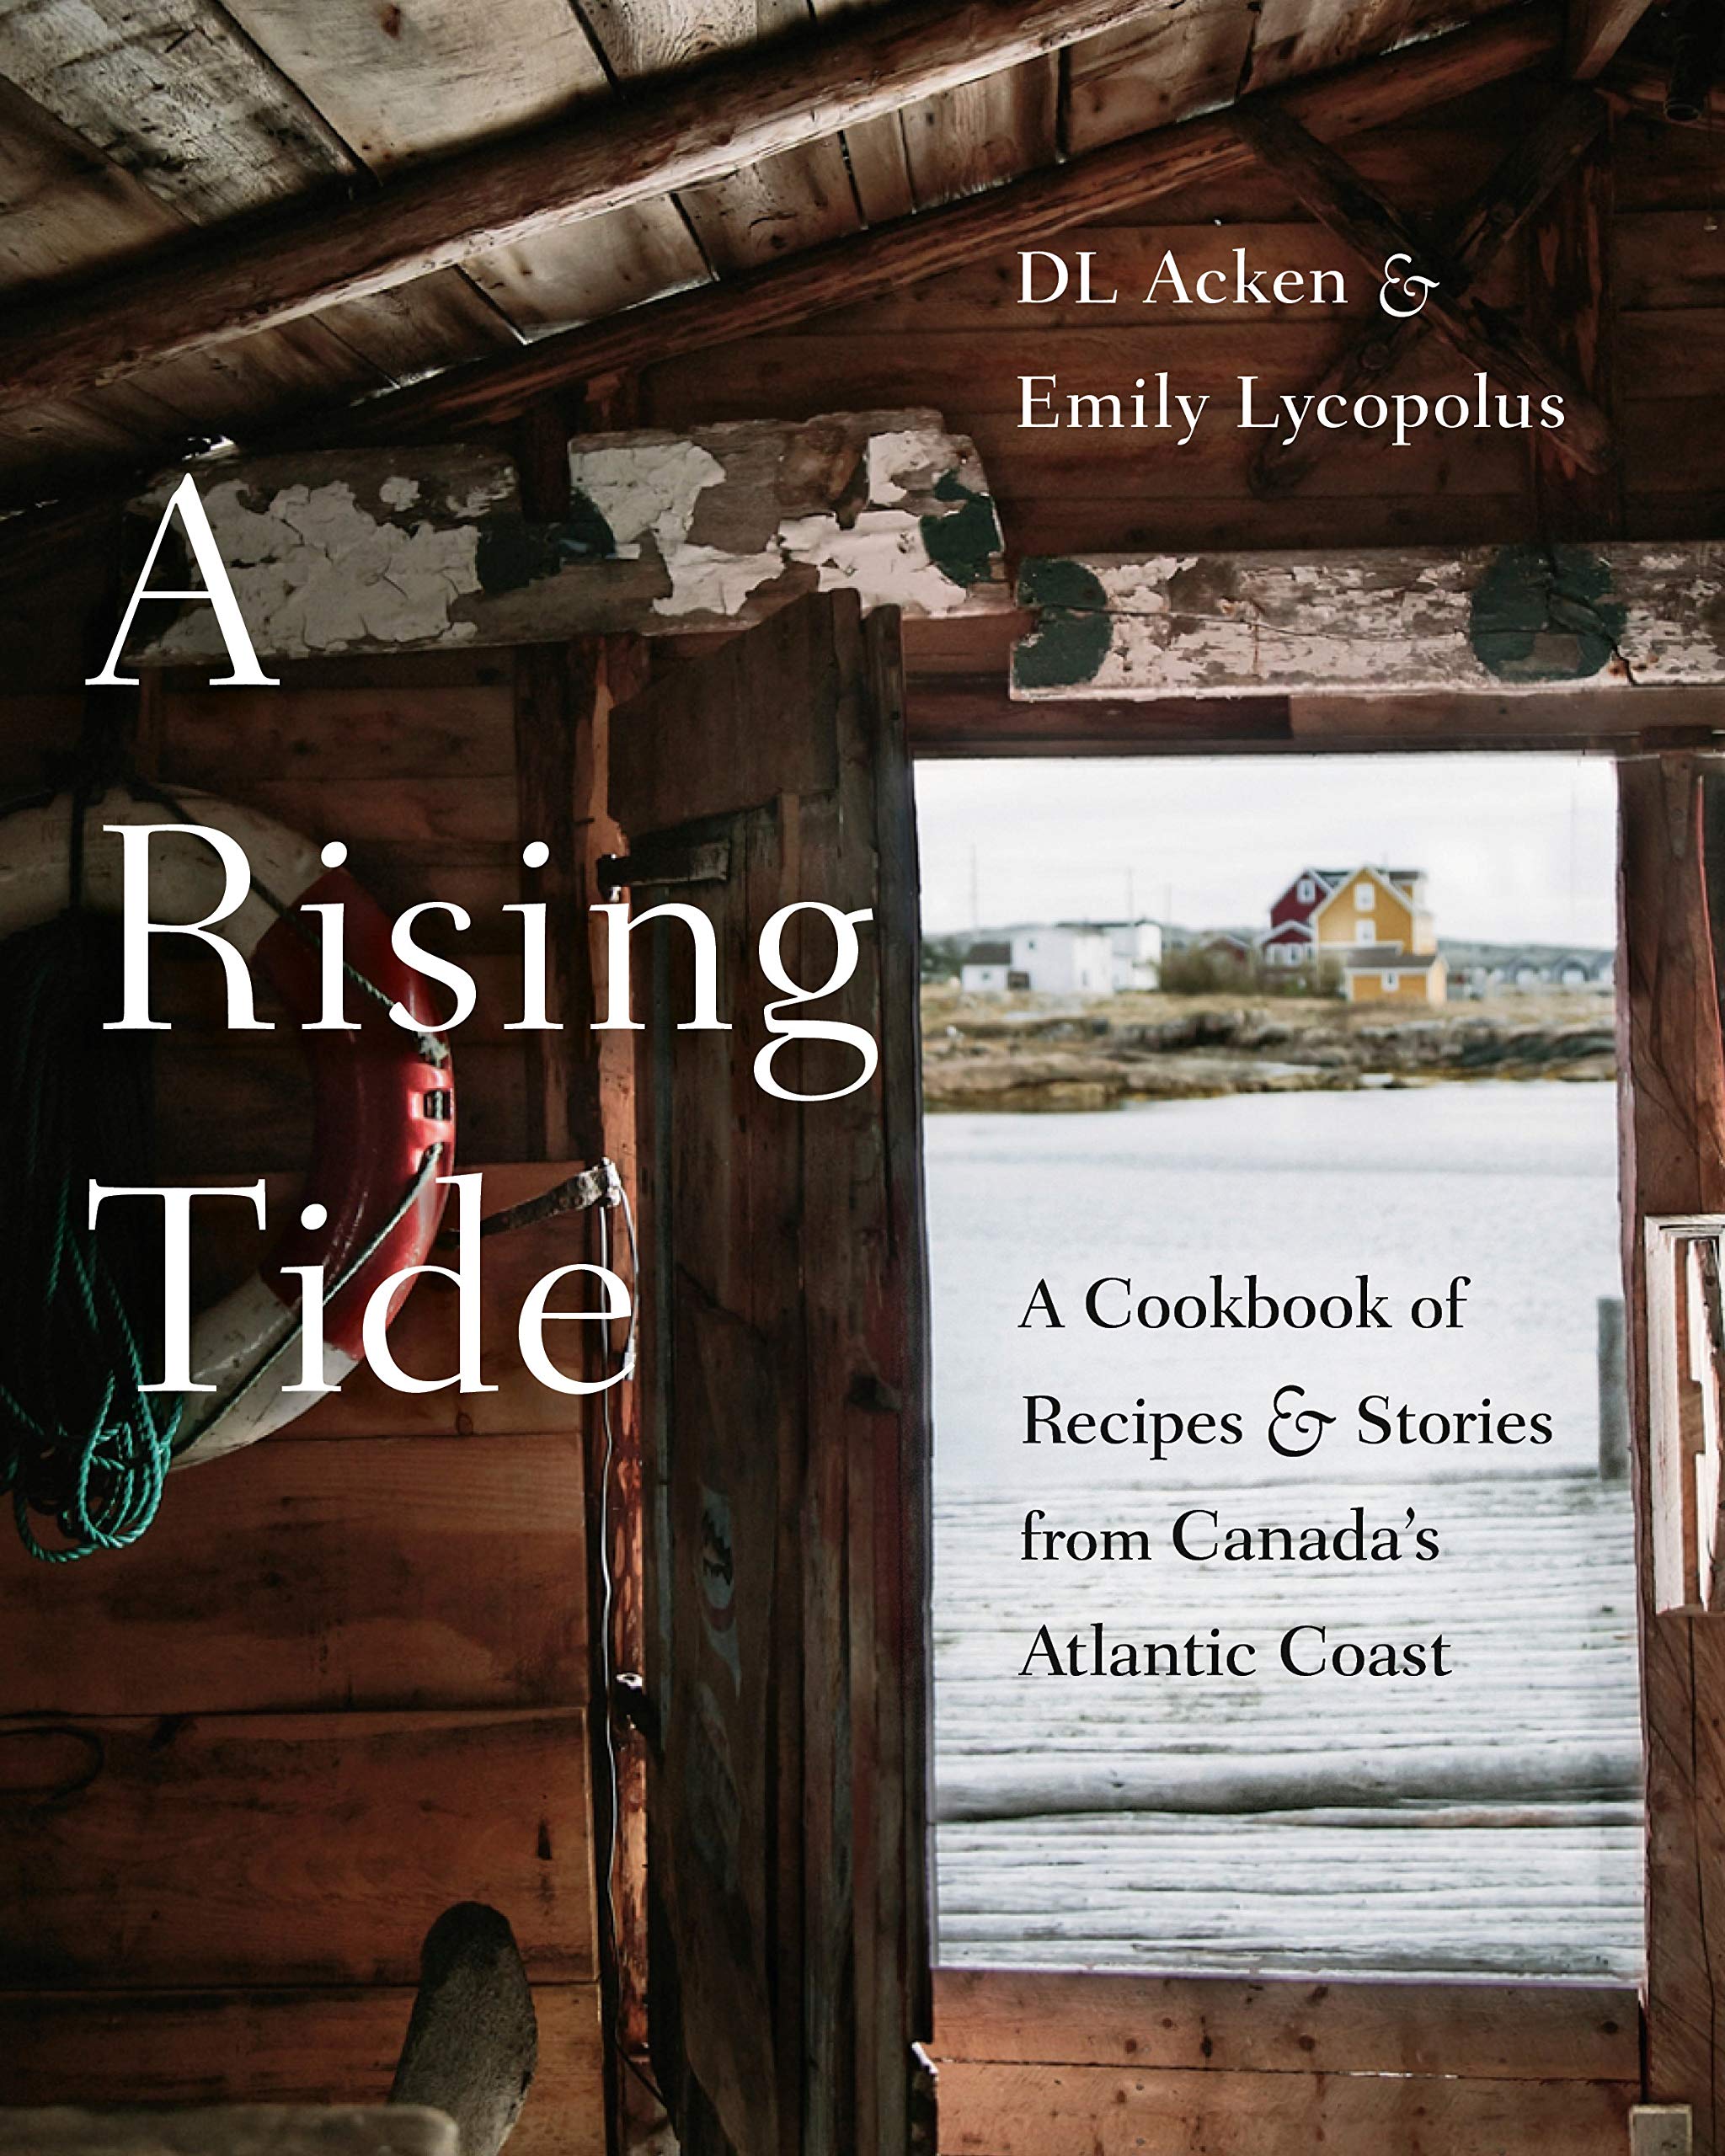 A rising tide travel guide book by DL Acken and Emily Lycopolus